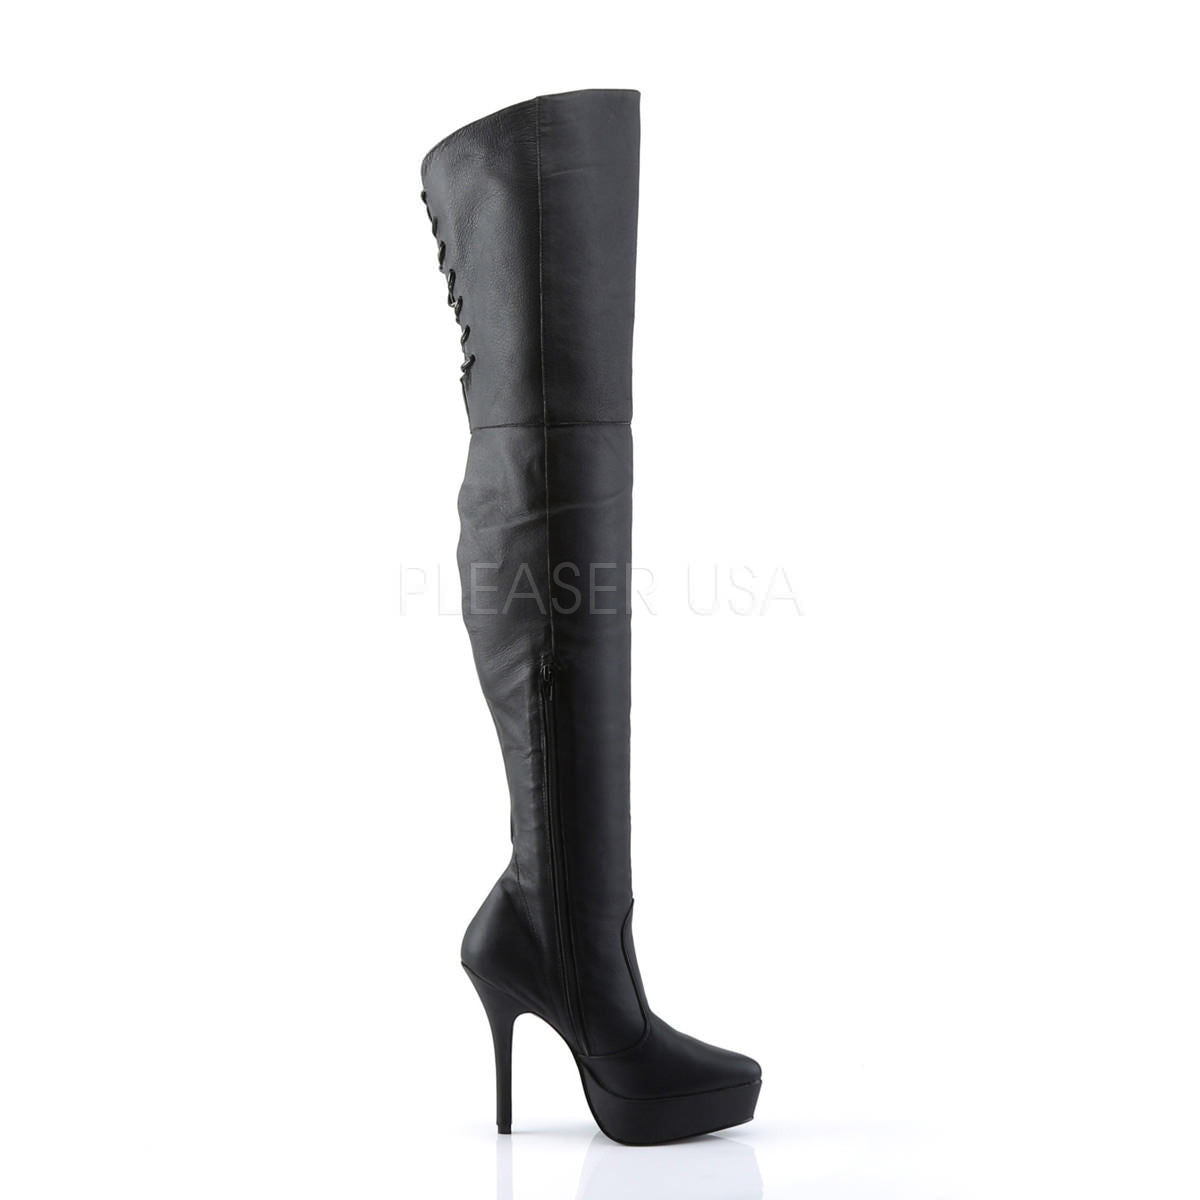 DEVIOUS INDULGE-3011 Black Leather Thigh High Boots